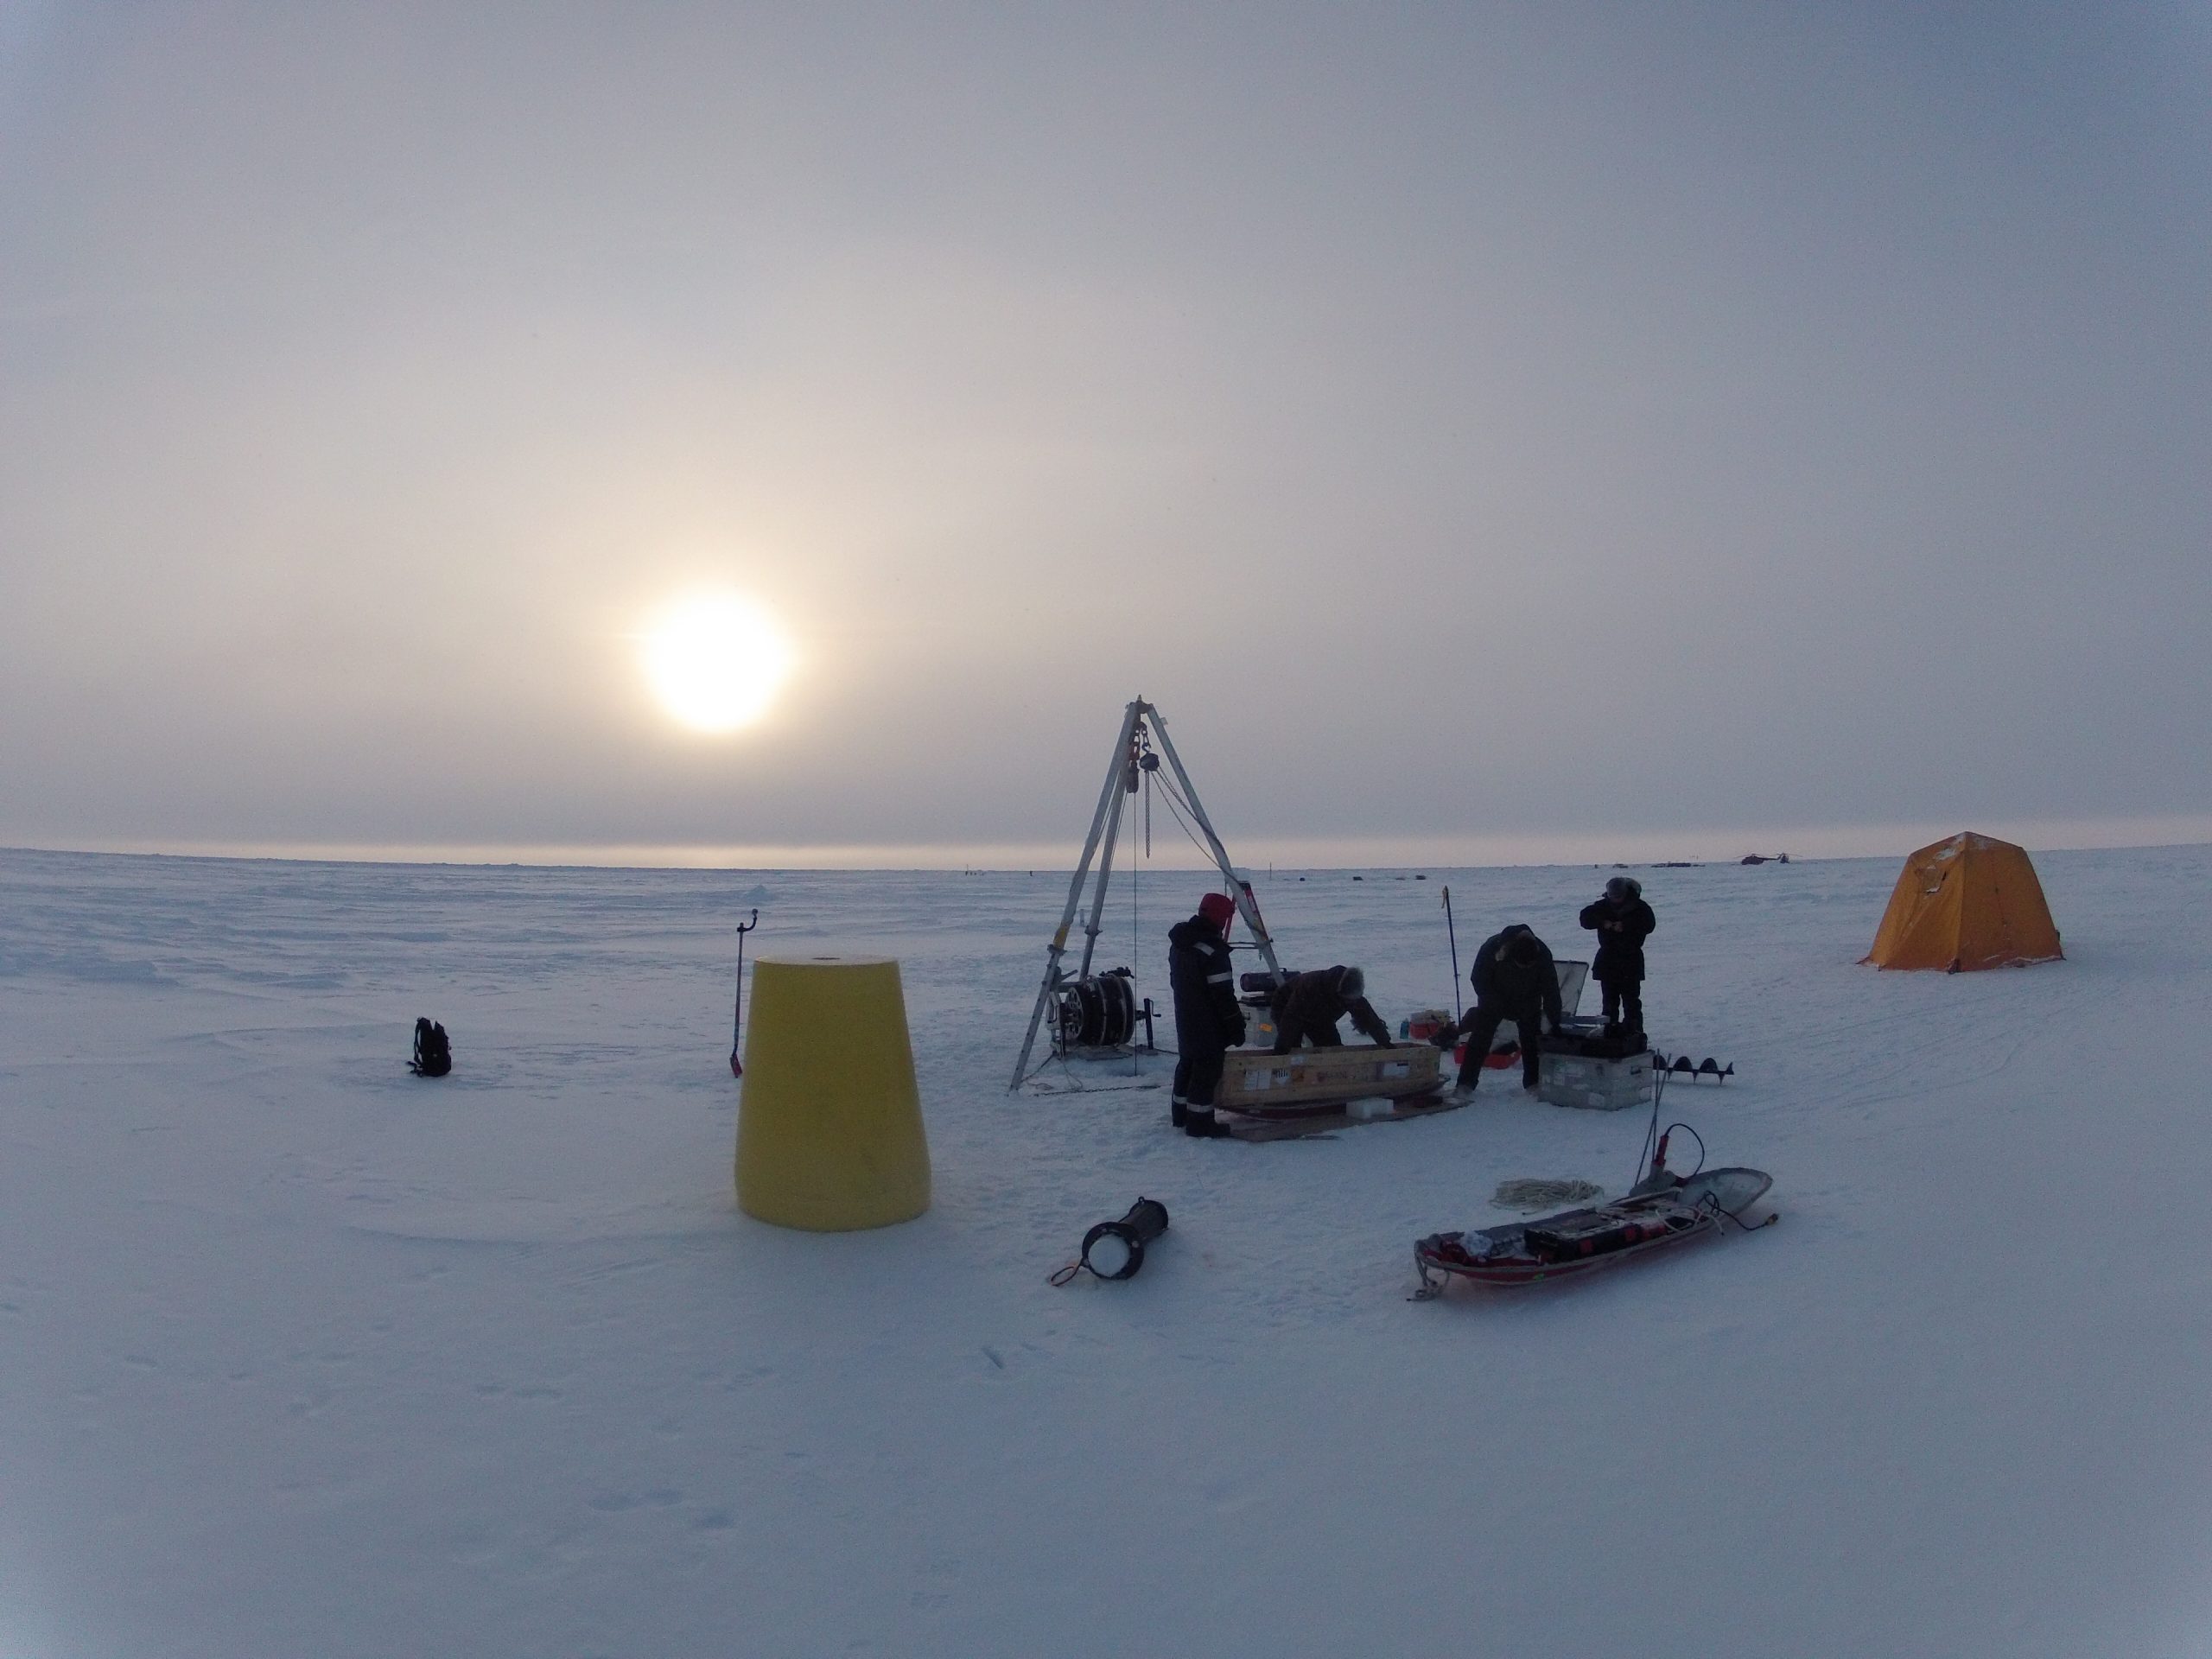 Deployment site for ITP 95. (Photo by Denis Dausse)